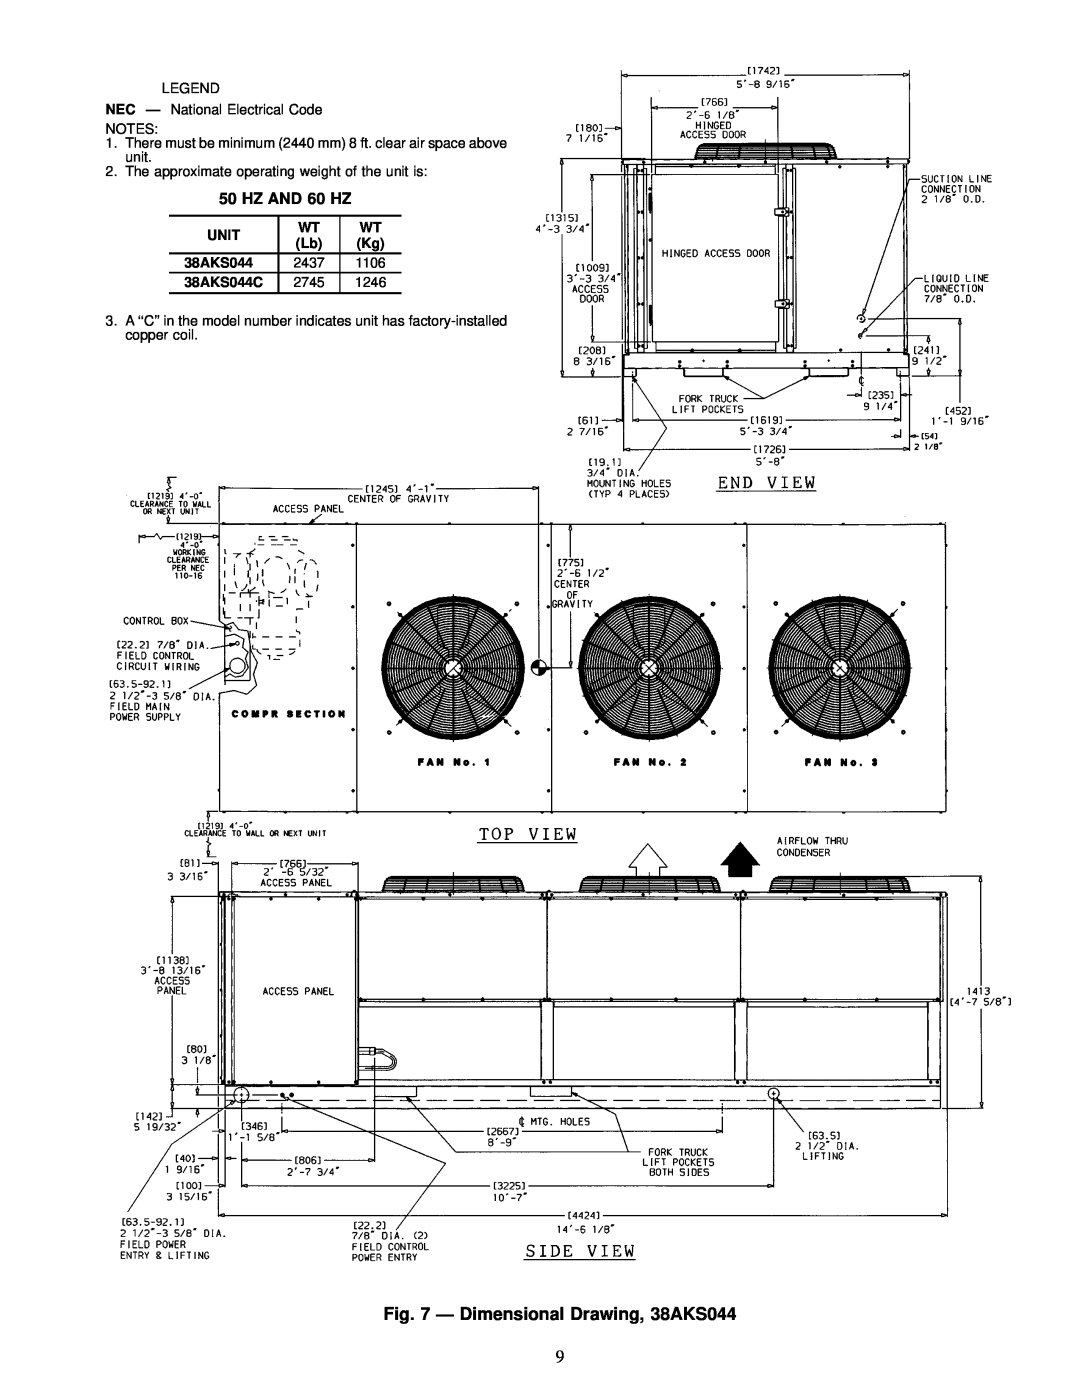 Carrier 38AKS028-044 dimensions Ð Dimensional Drawing, 38AKS044, HZ AND 60 HZ, 1106 